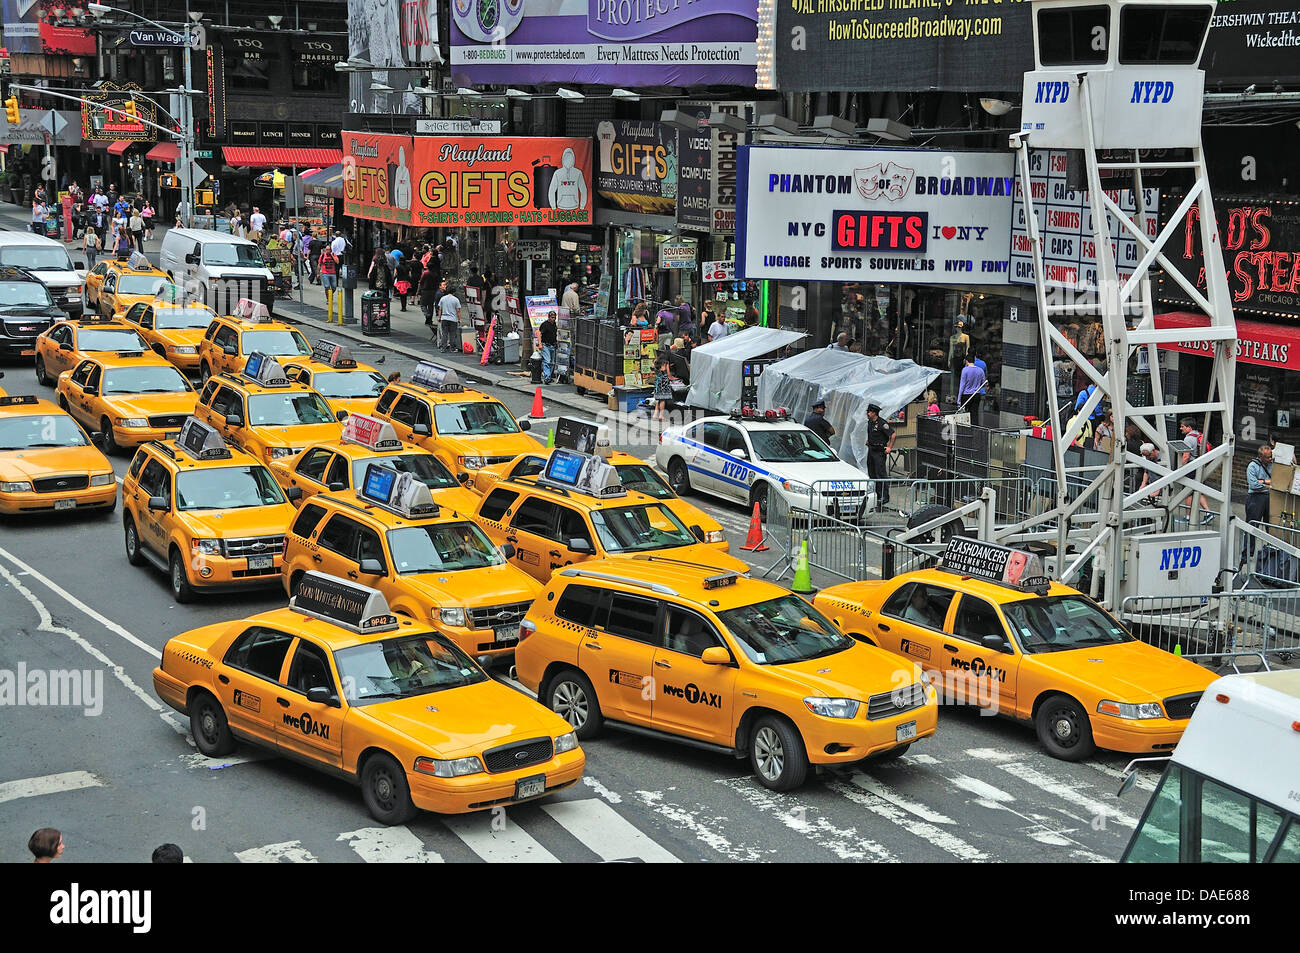 Rush Hour mit vielen Taxis am Times Square in Manhattan Midtown, USA, New York City Stockfoto